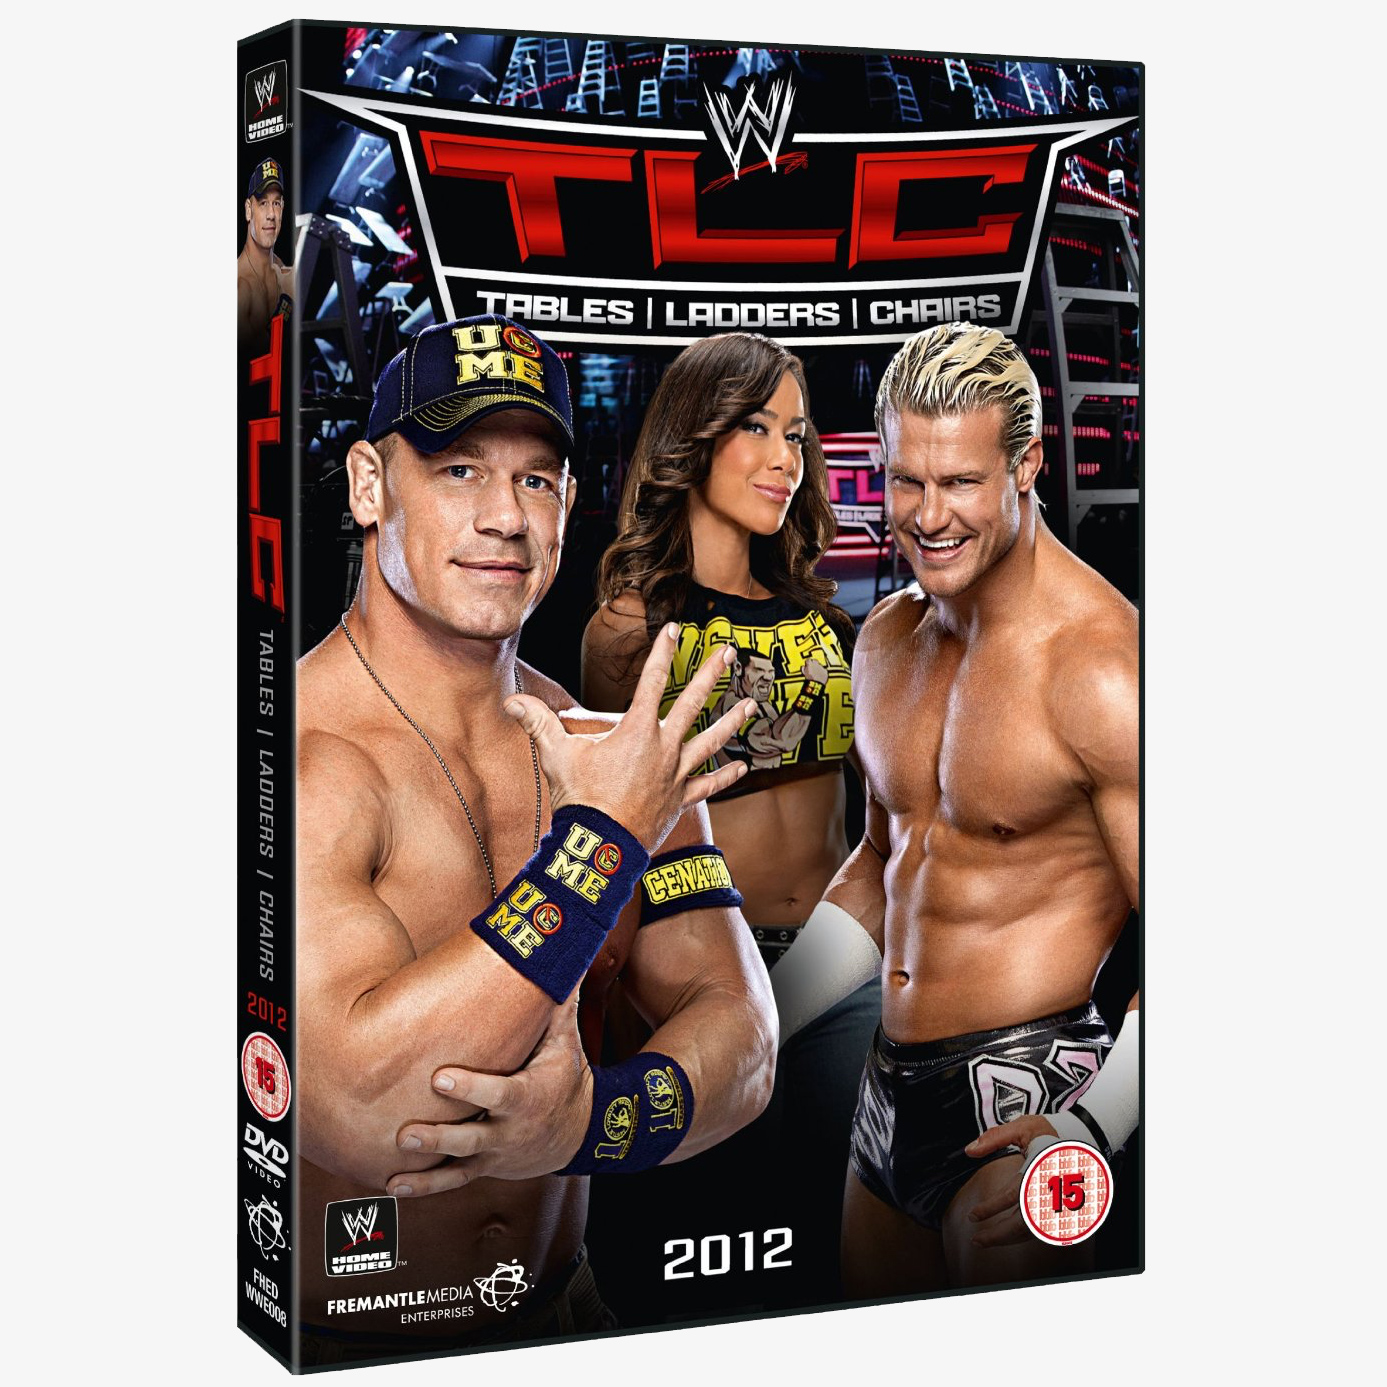 WWE TLC: Tables Ladders & Chairs 2012 #6